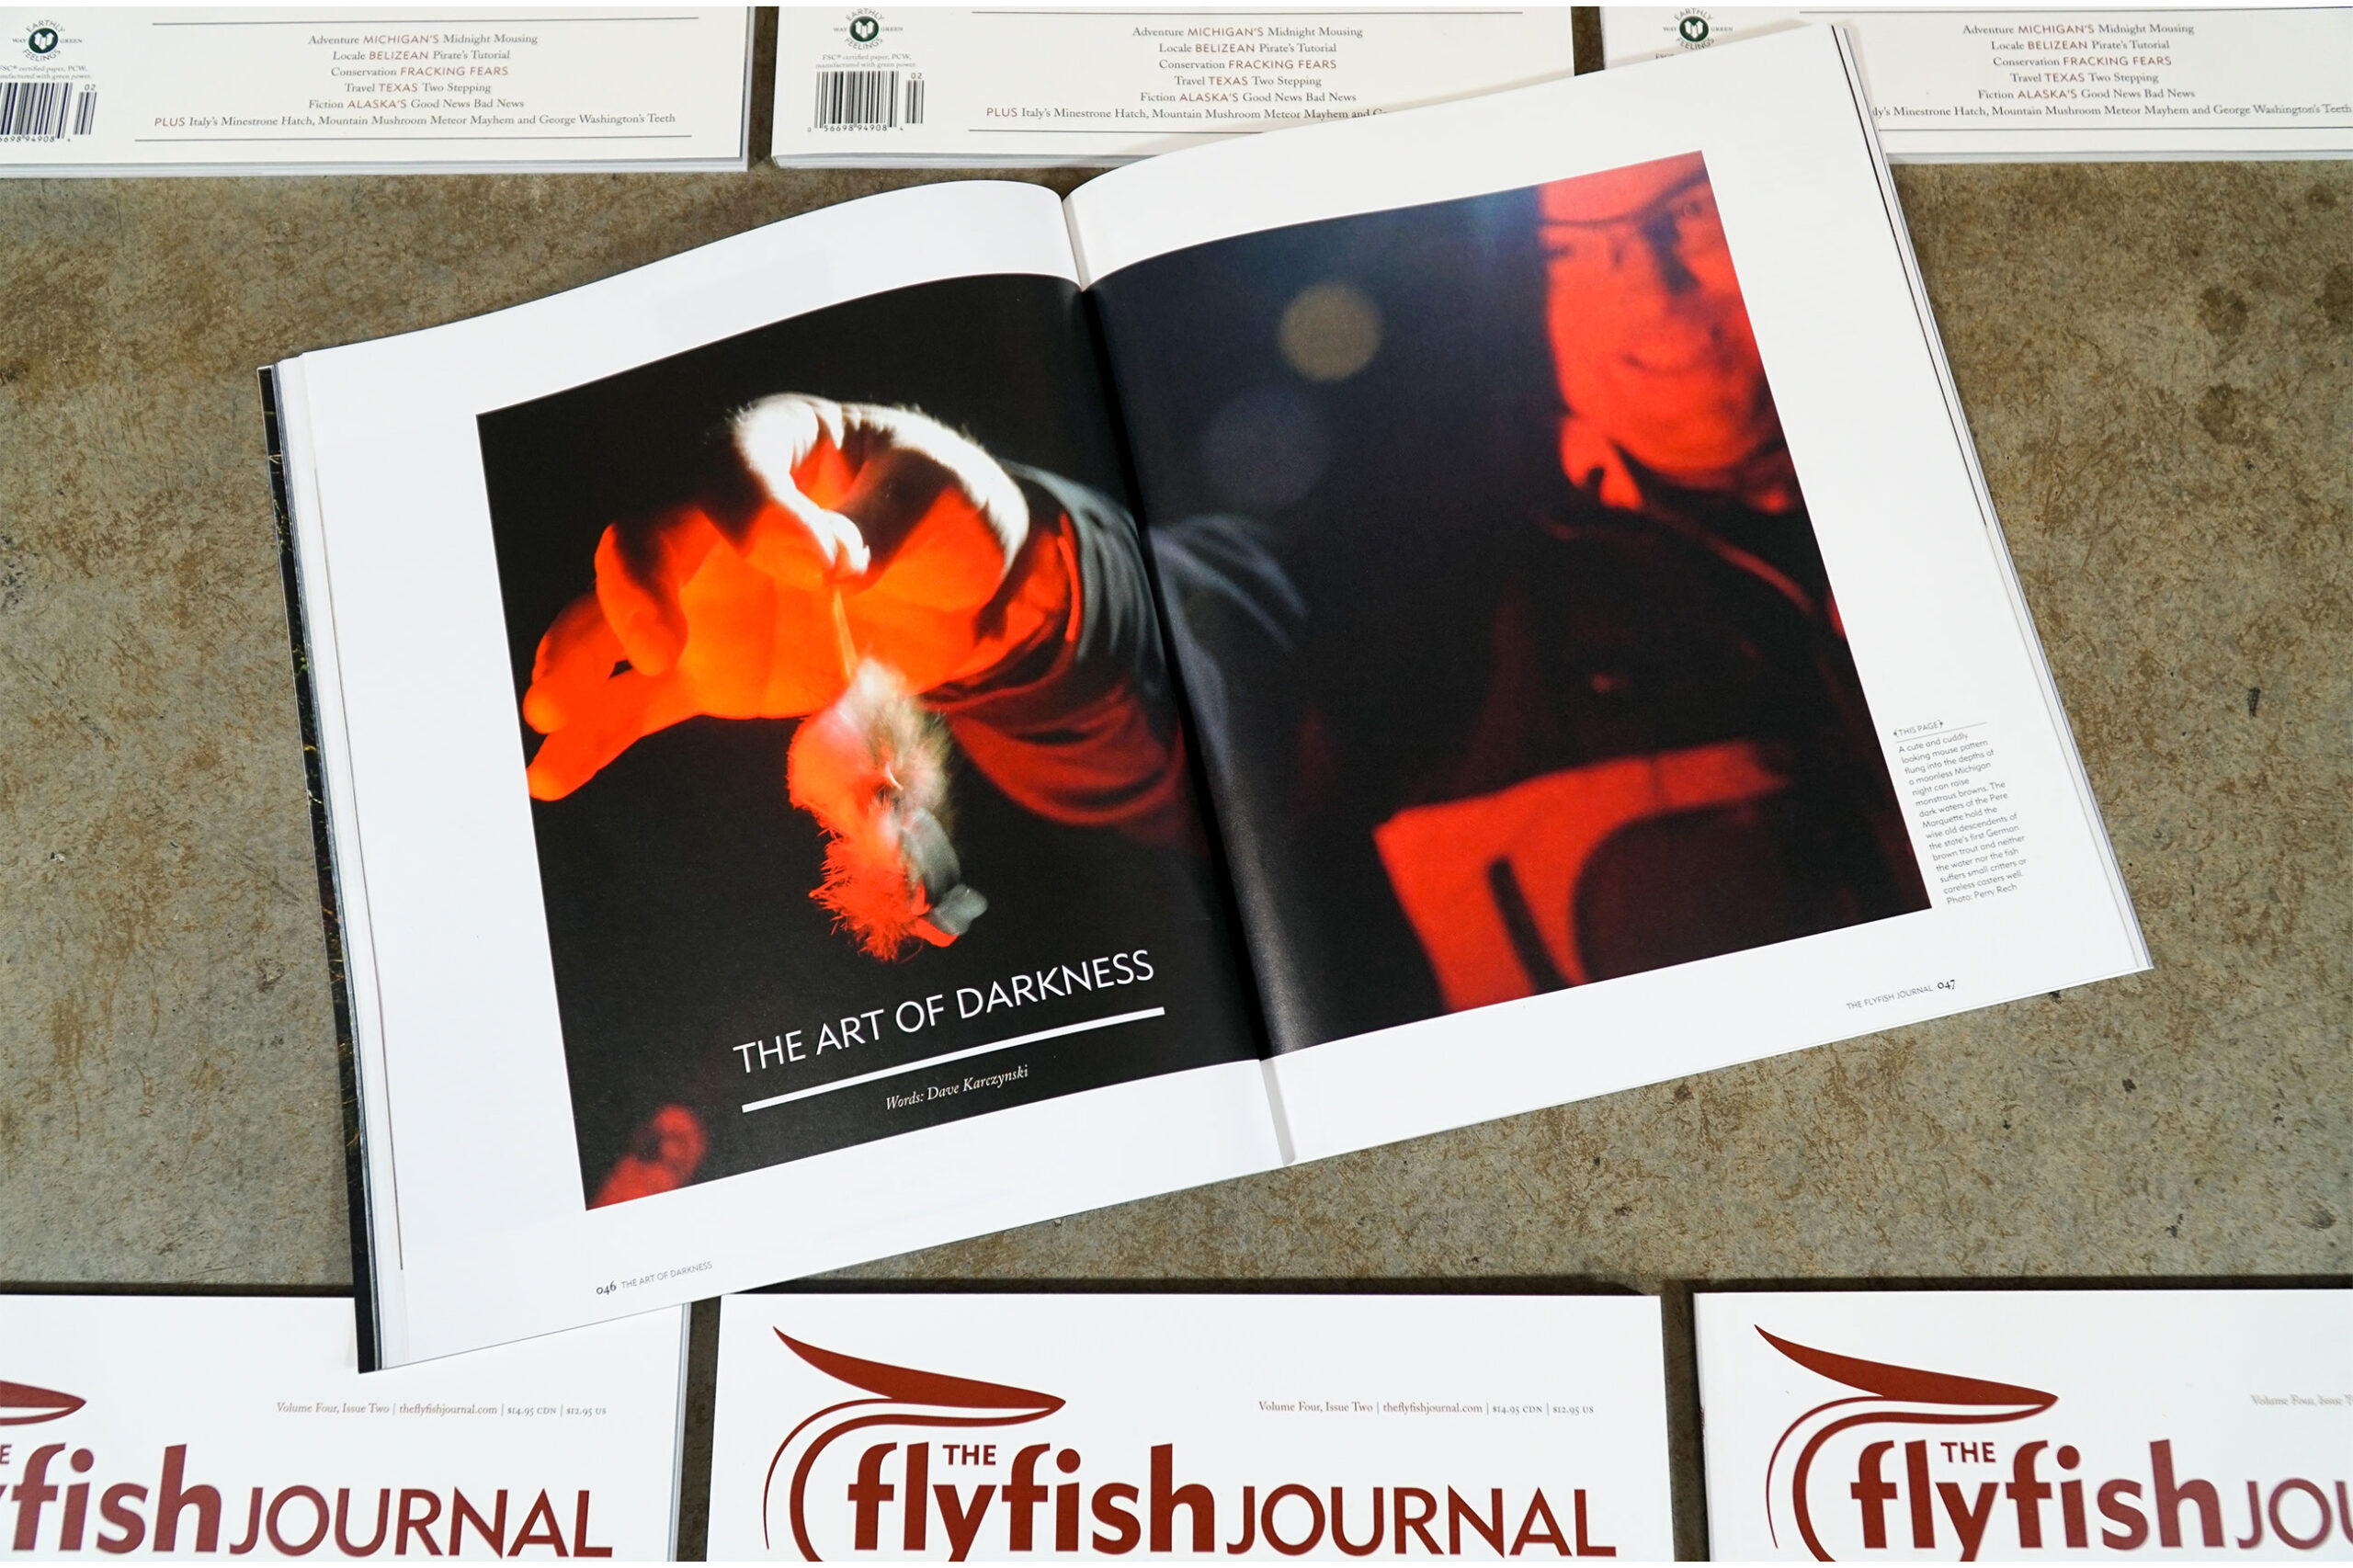 The Flyfish Journal Volume 4 Issue 2 Feature The Art of Darkness